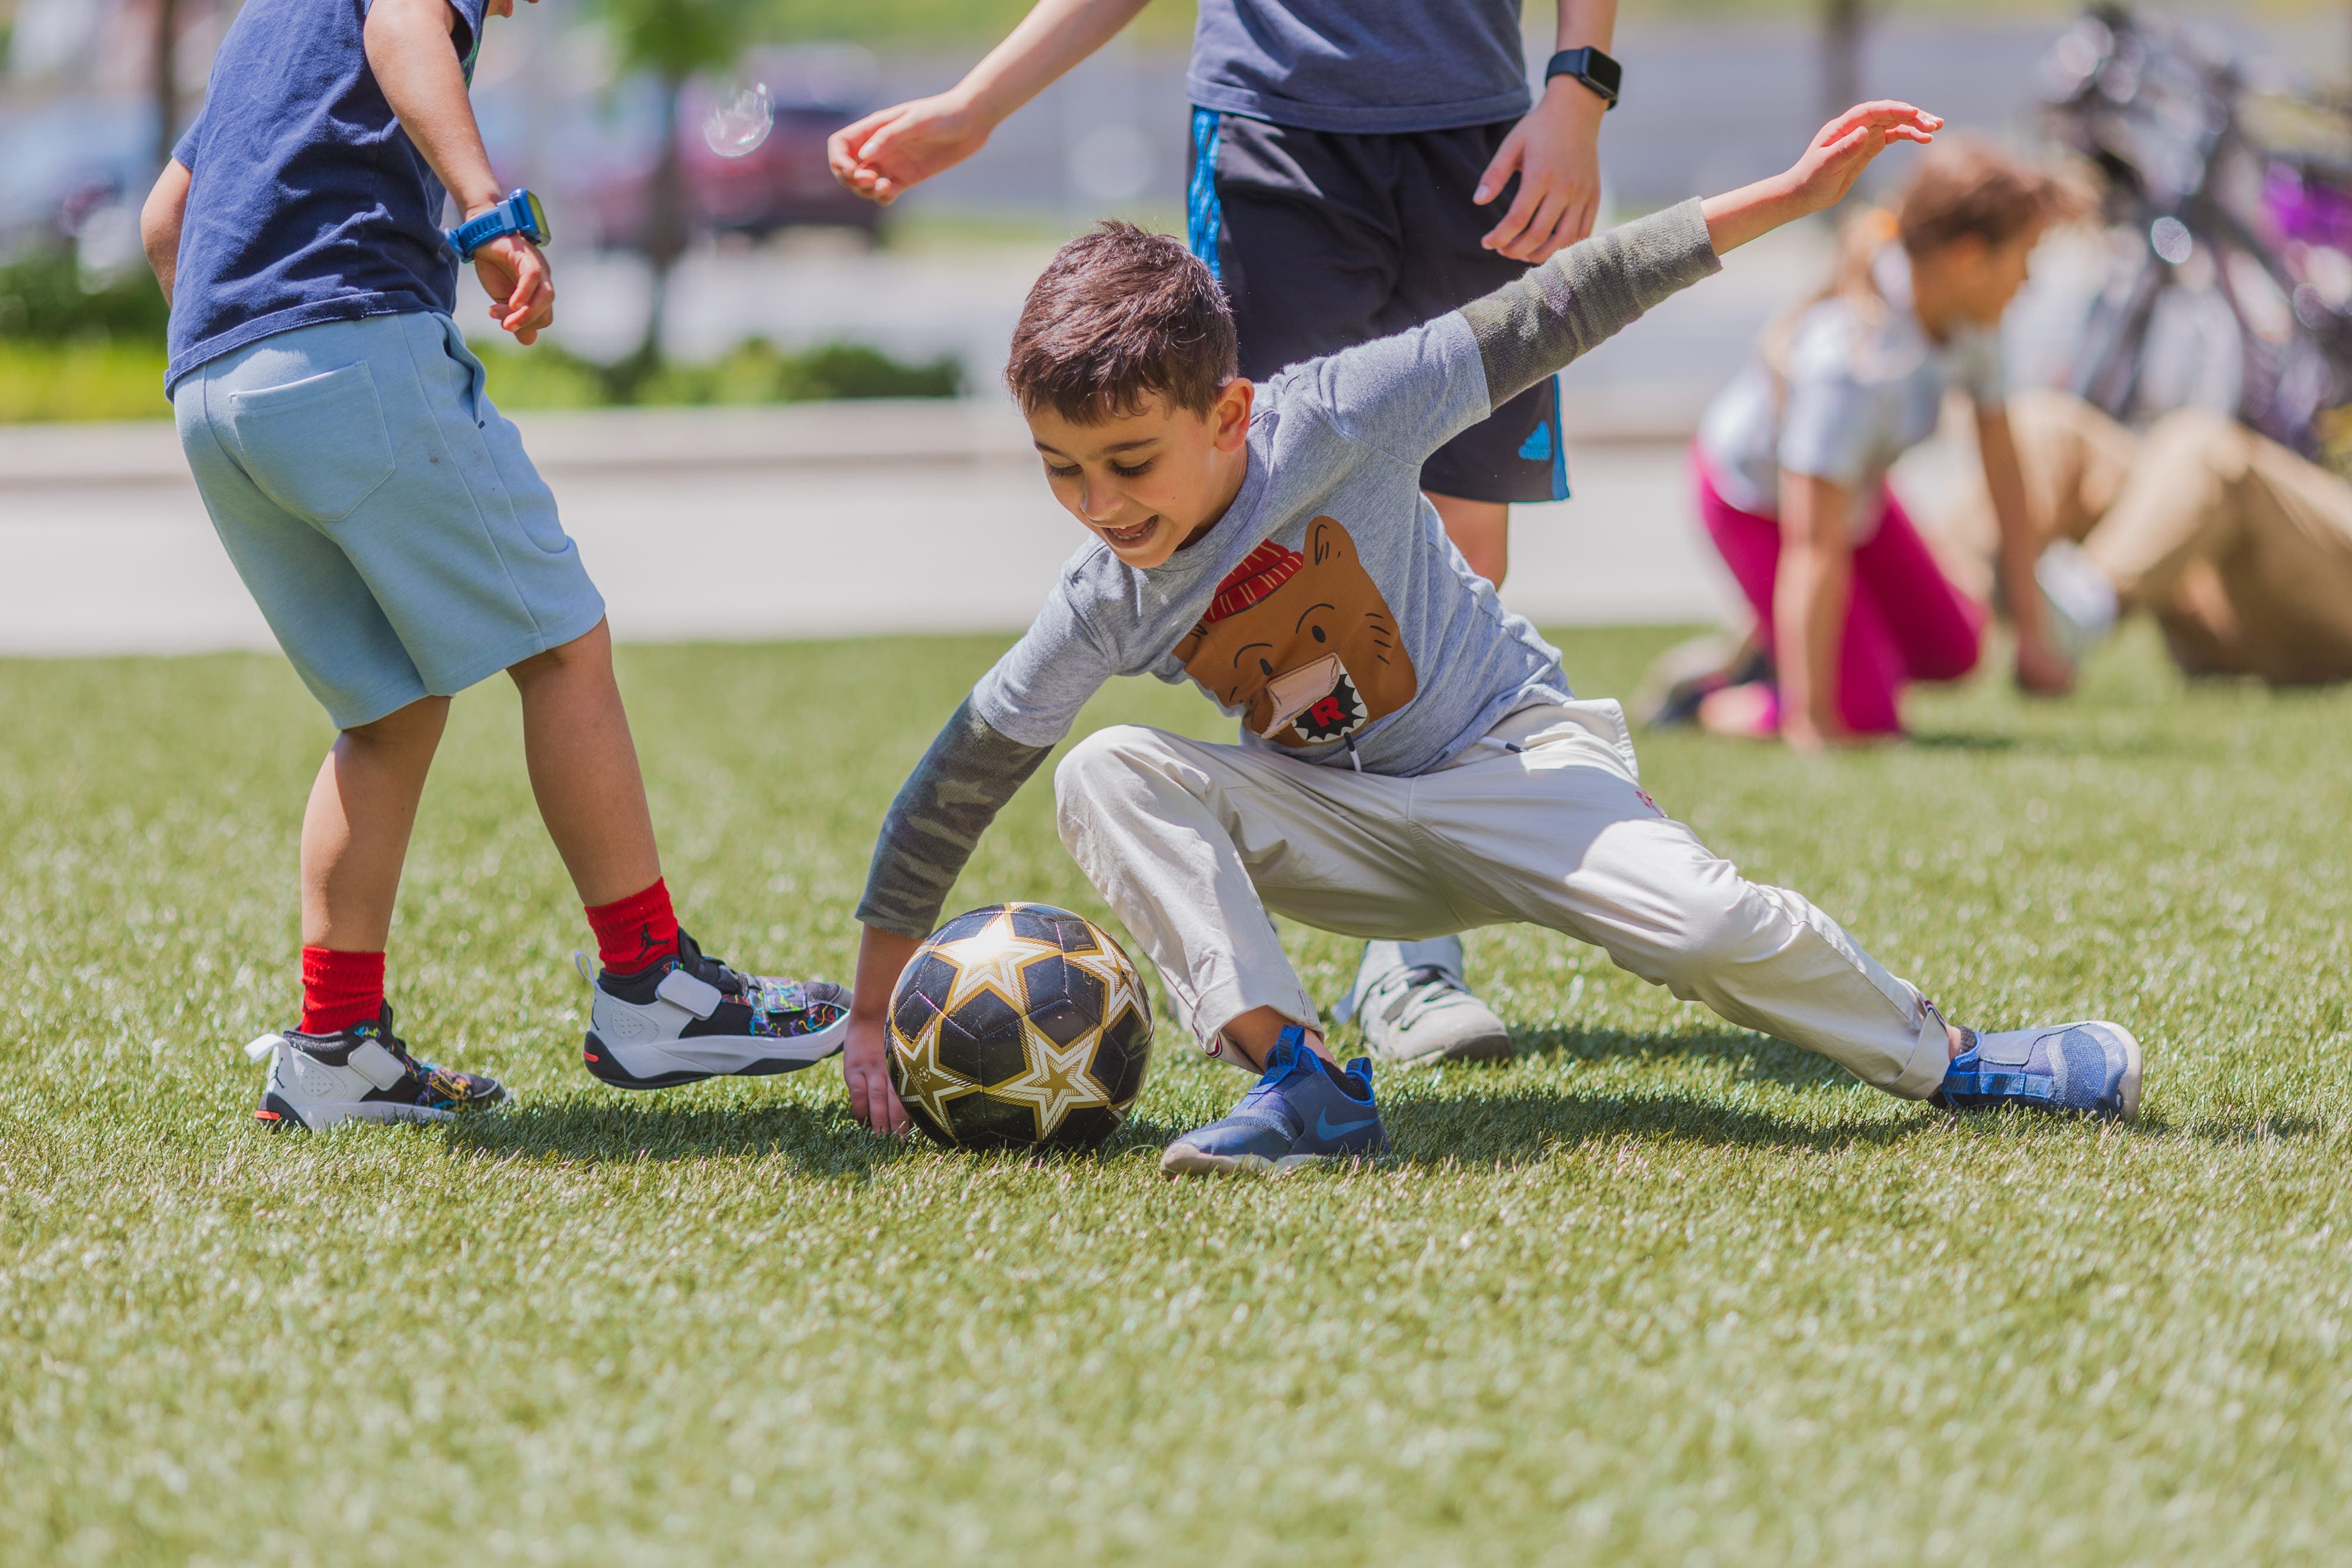 Copa Tysons: Euro Cup Final Watch Party and Family Soccer Festival